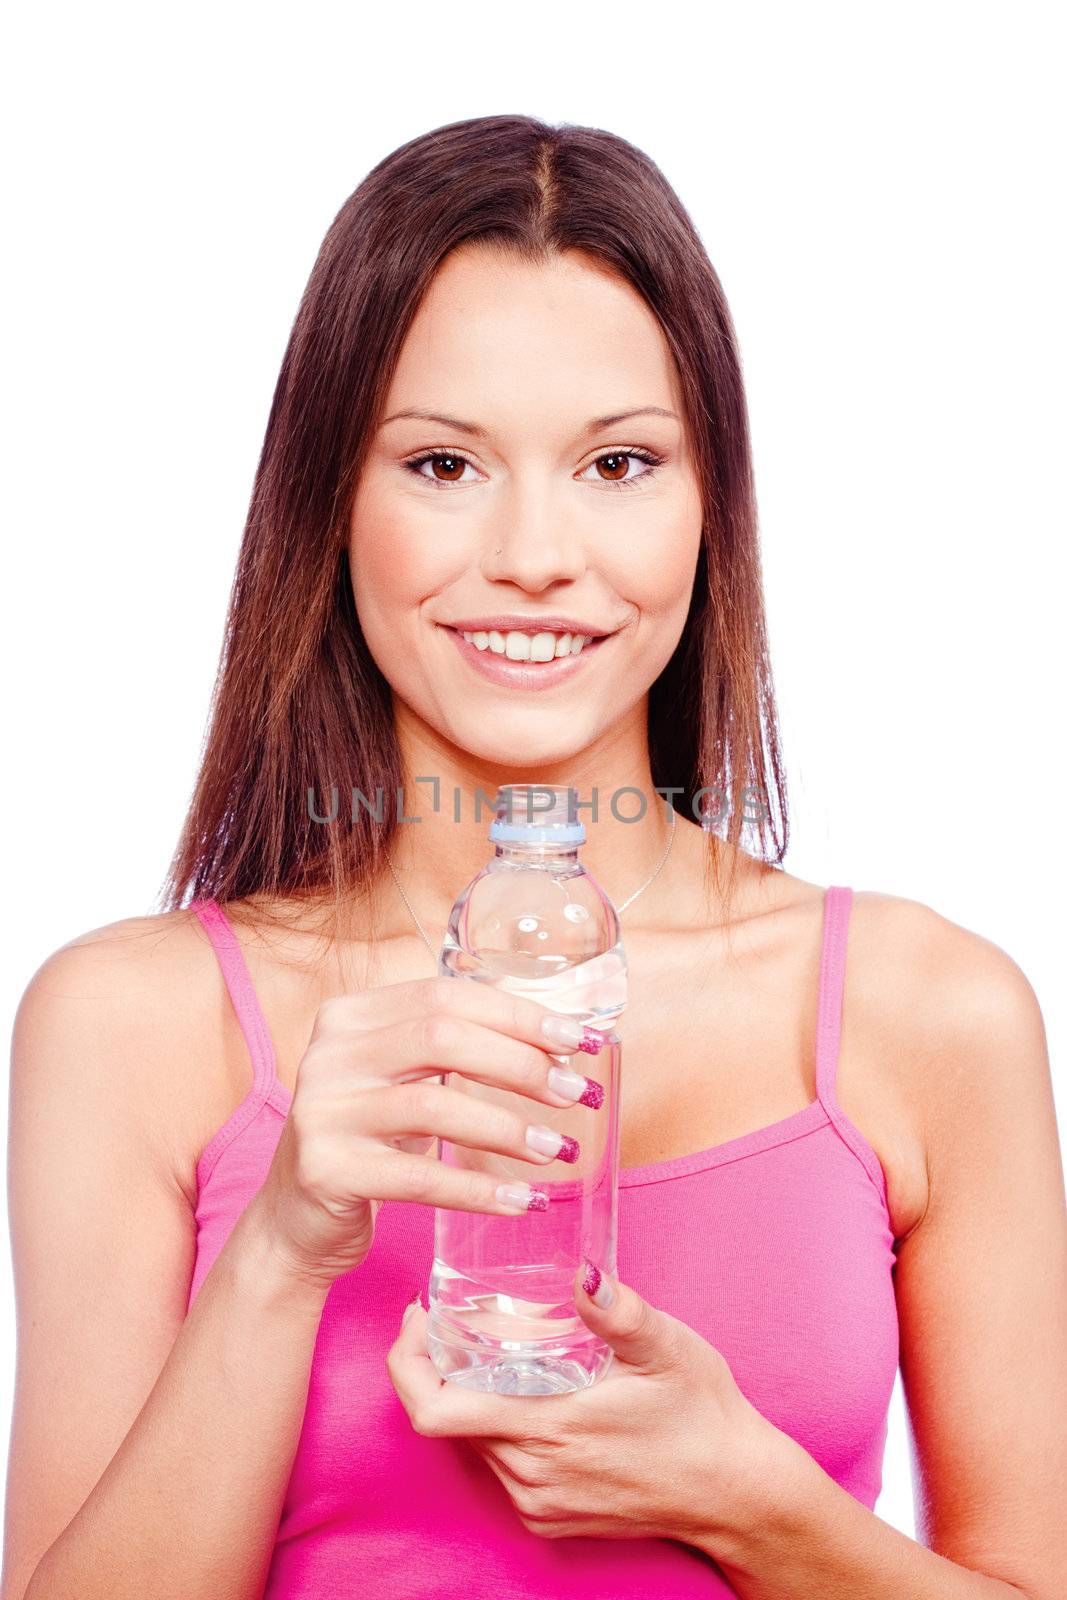 Woman holding bottle of water, isolated on white